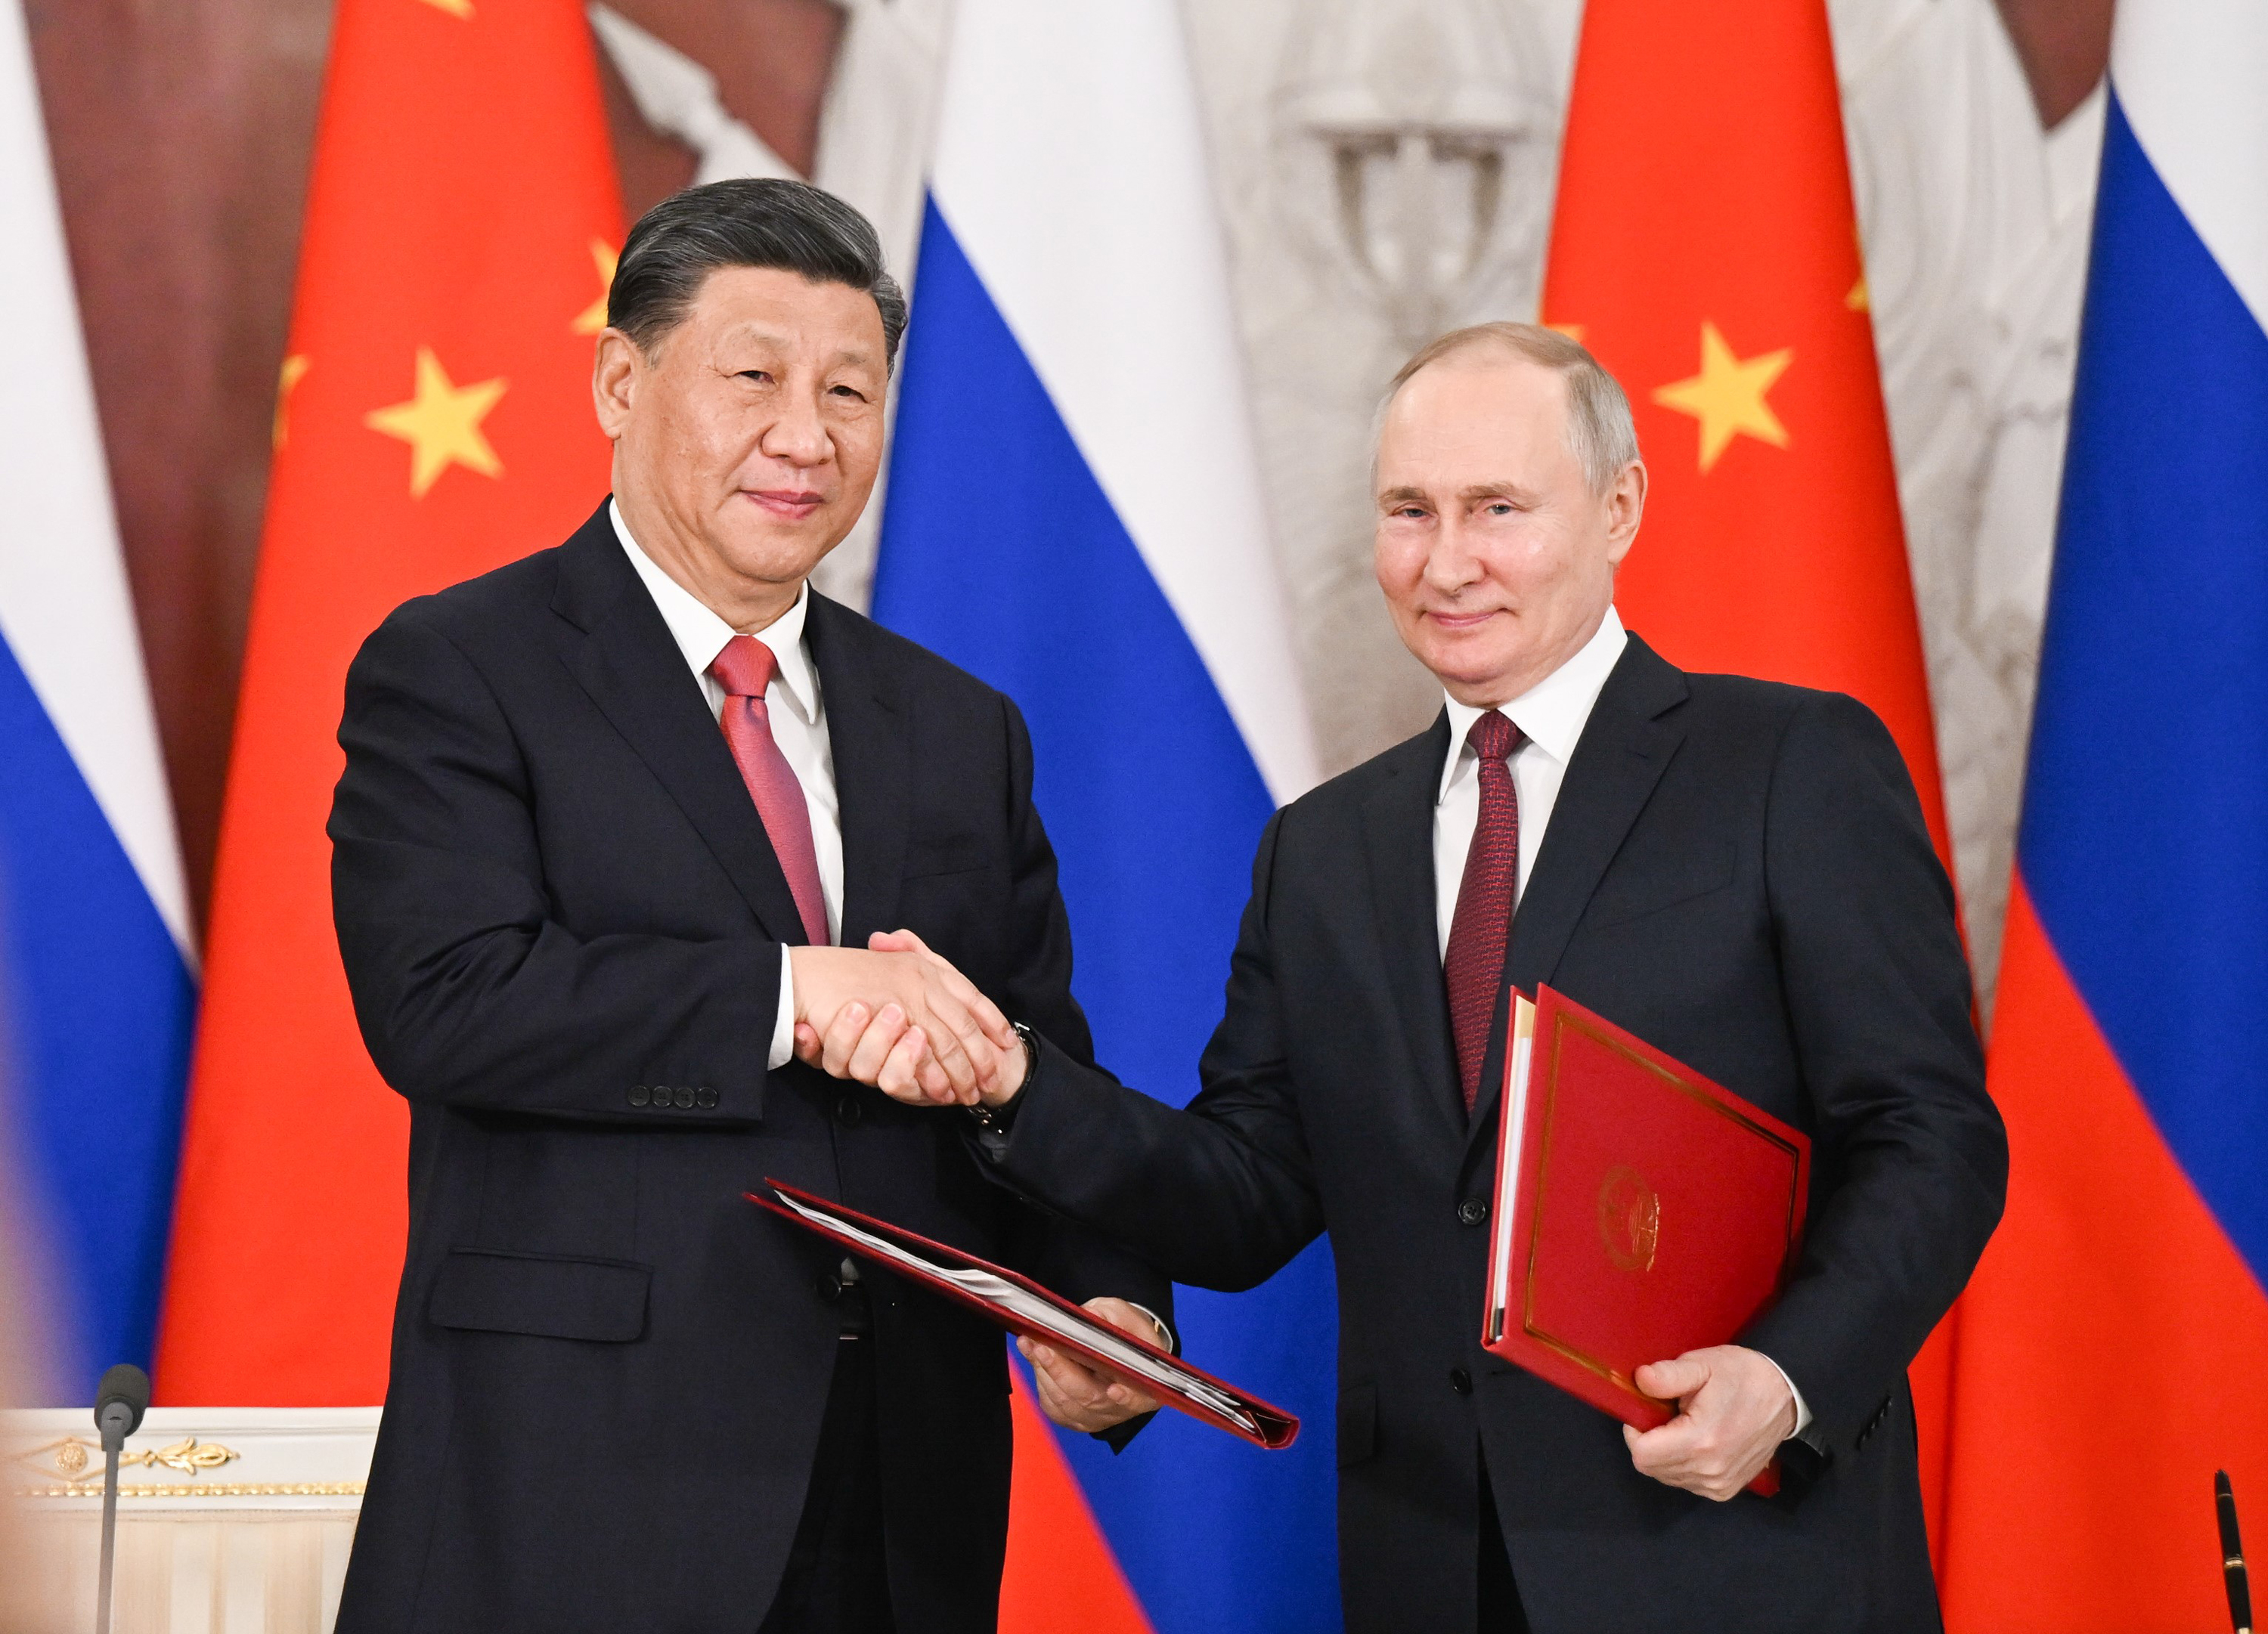 Chinese President Xi Jinping and Russian President Vladimir Putin shake hands during a visit from Xi in Moscow. On Tuesday, Xi held talks with Putin at the Kremlin.